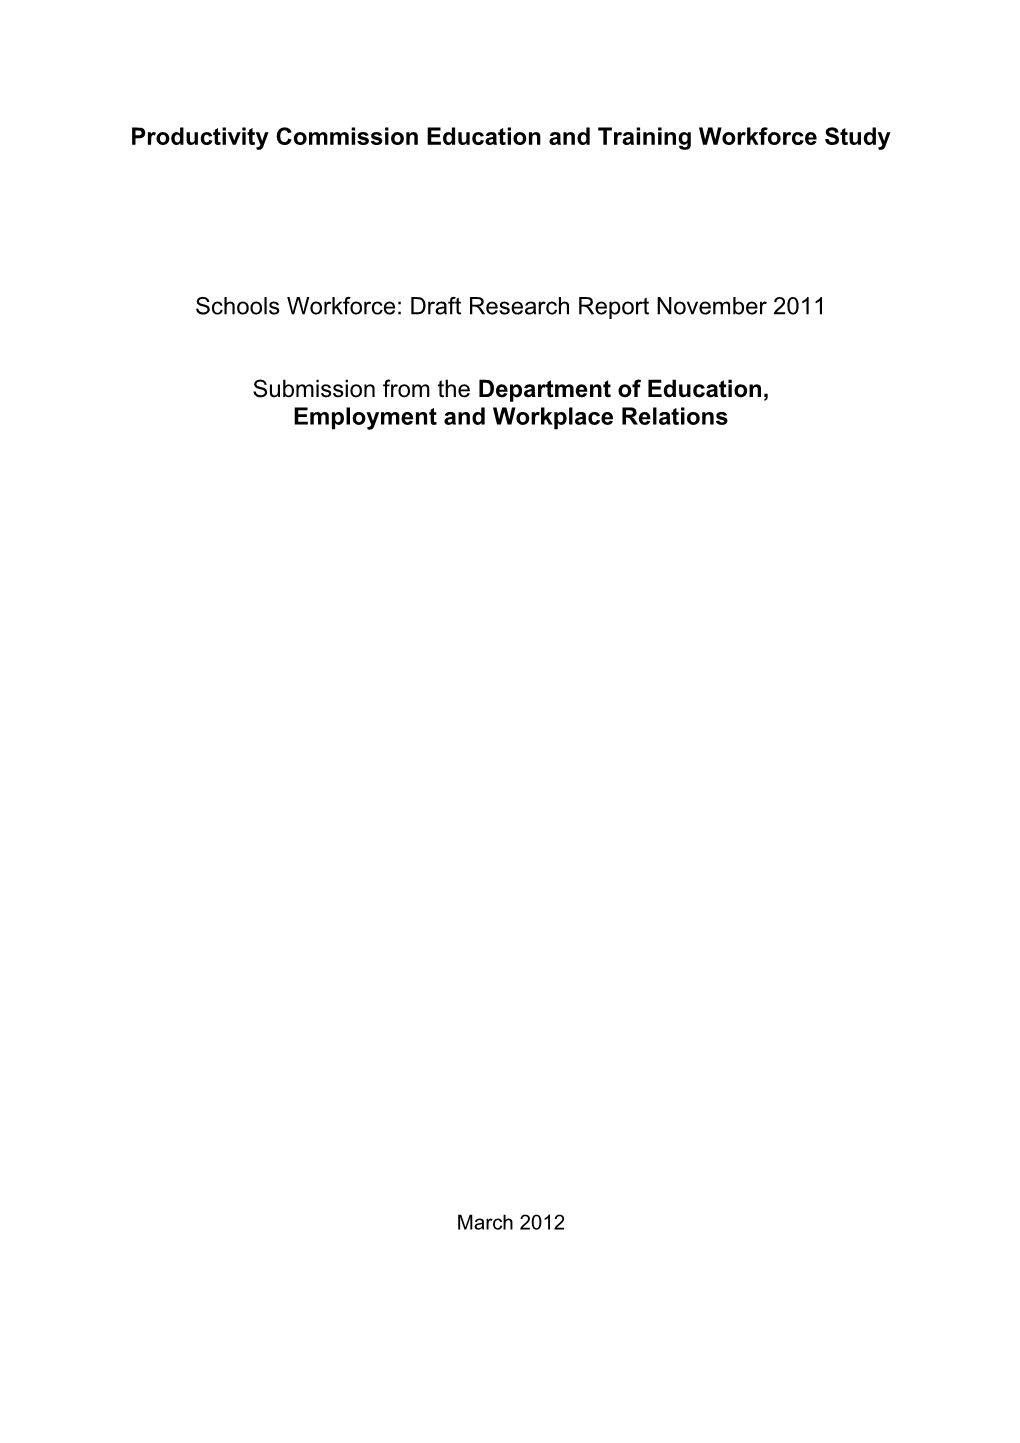 Submission DR94 - Department of Education, Employment and Workplace Relations - Education